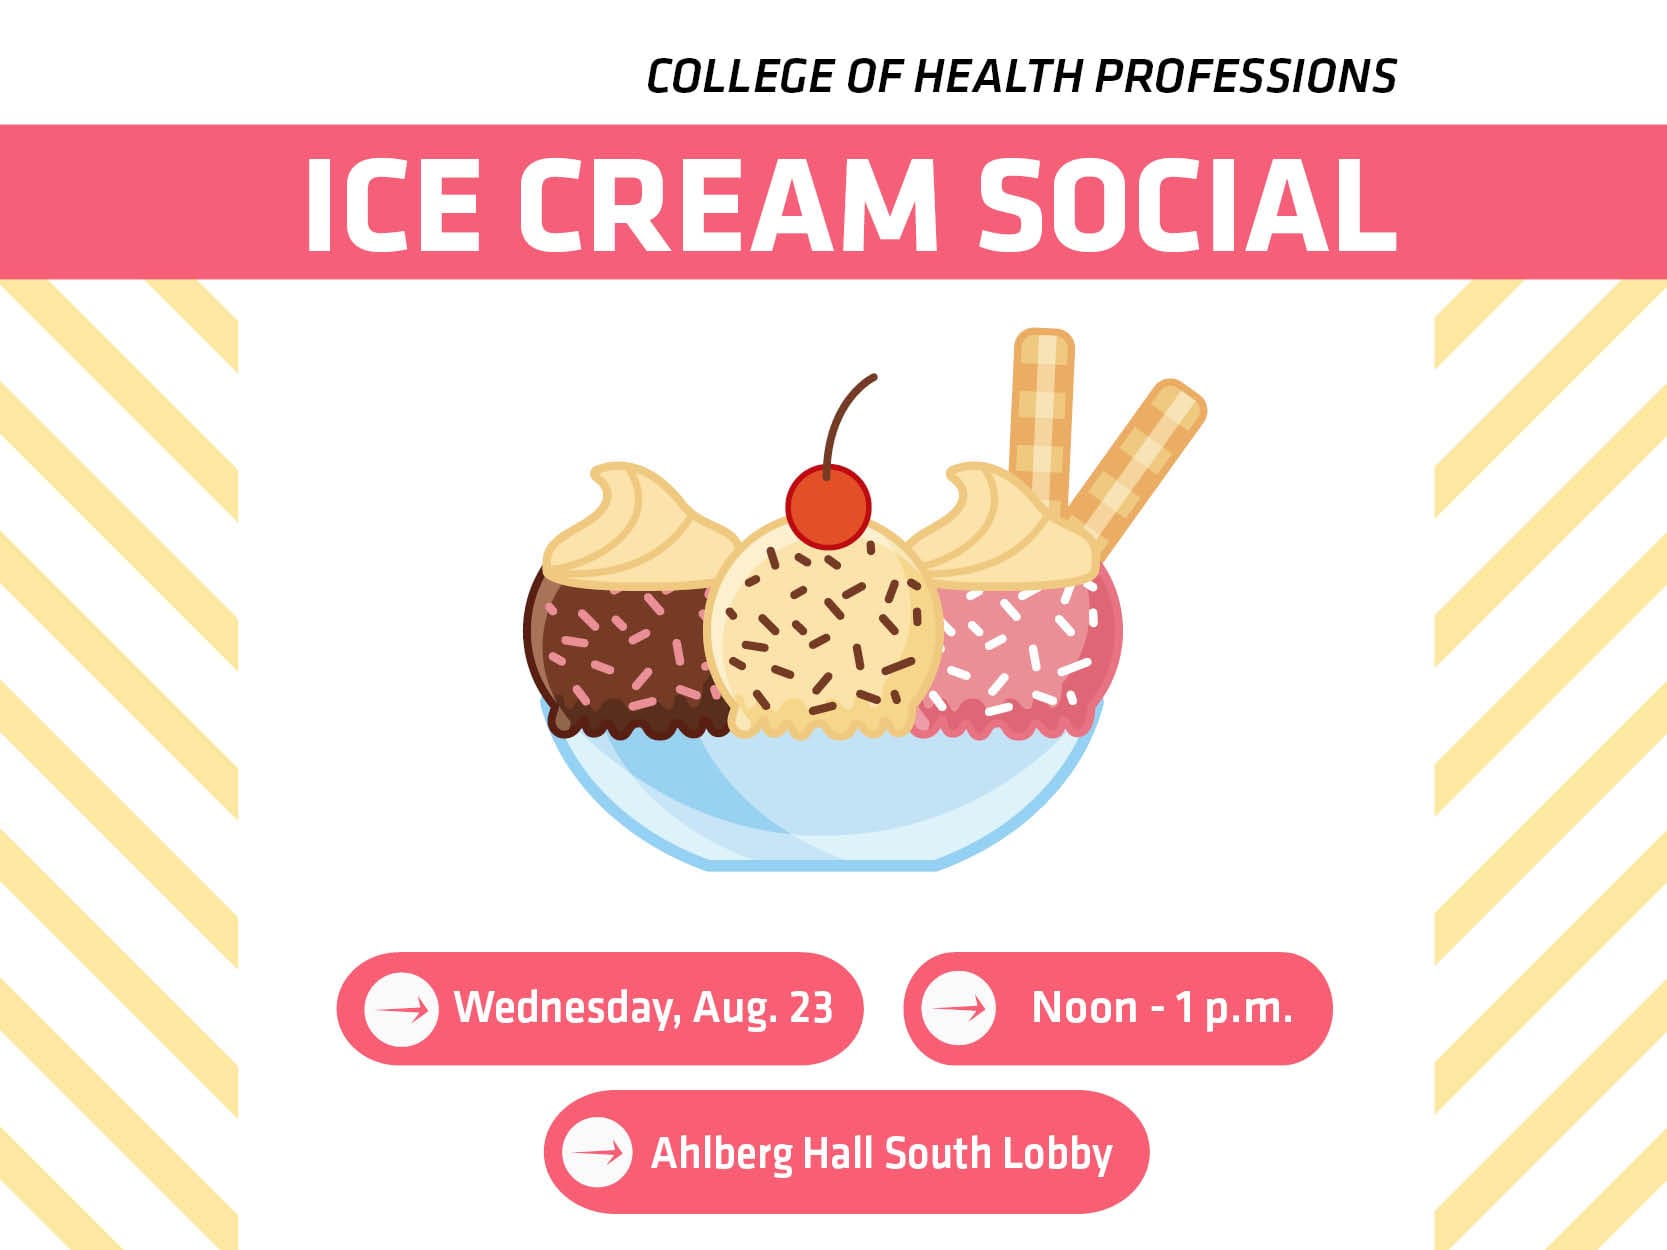 College of Health Professions Ice Cream Social Wednesday, Aug. 23 noon - 1 p.m. Ahlberg Hall south lobby